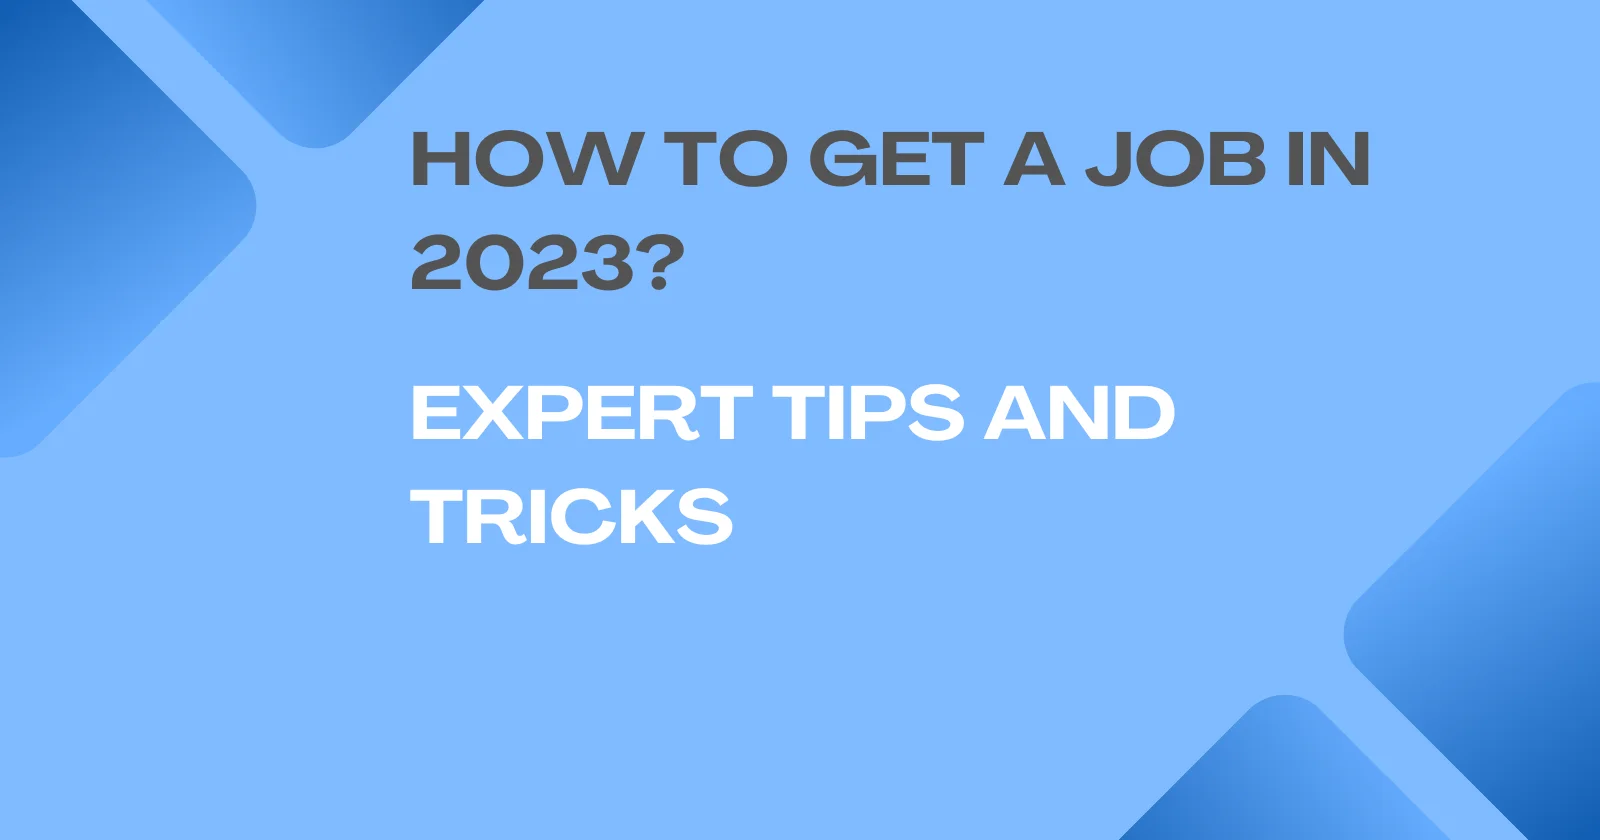 How to Get a Job in 2023?